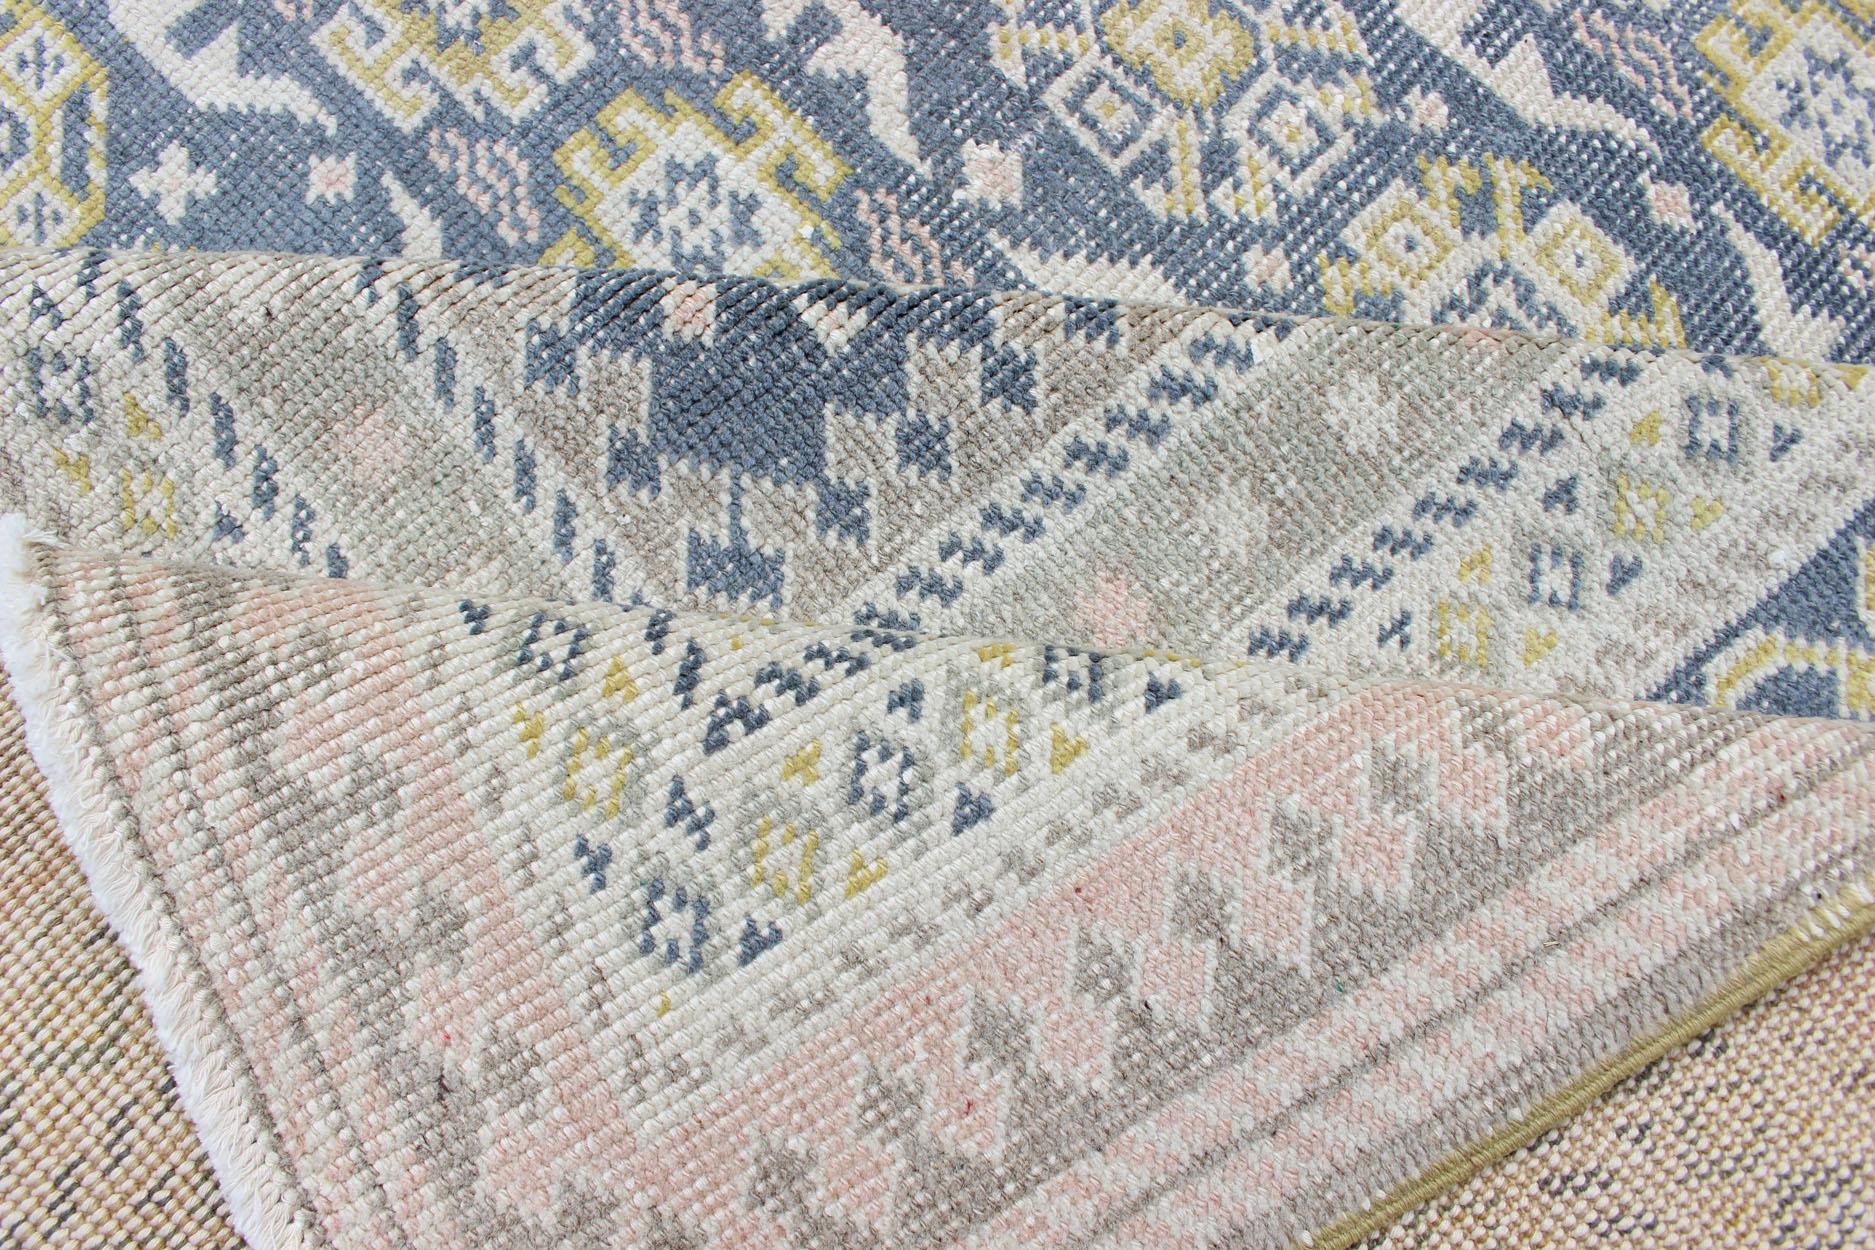 Hand-Knotted Antique Khotan Rug in Shades of Blue with Gray, L. Pink and Yellow Accents For Sale